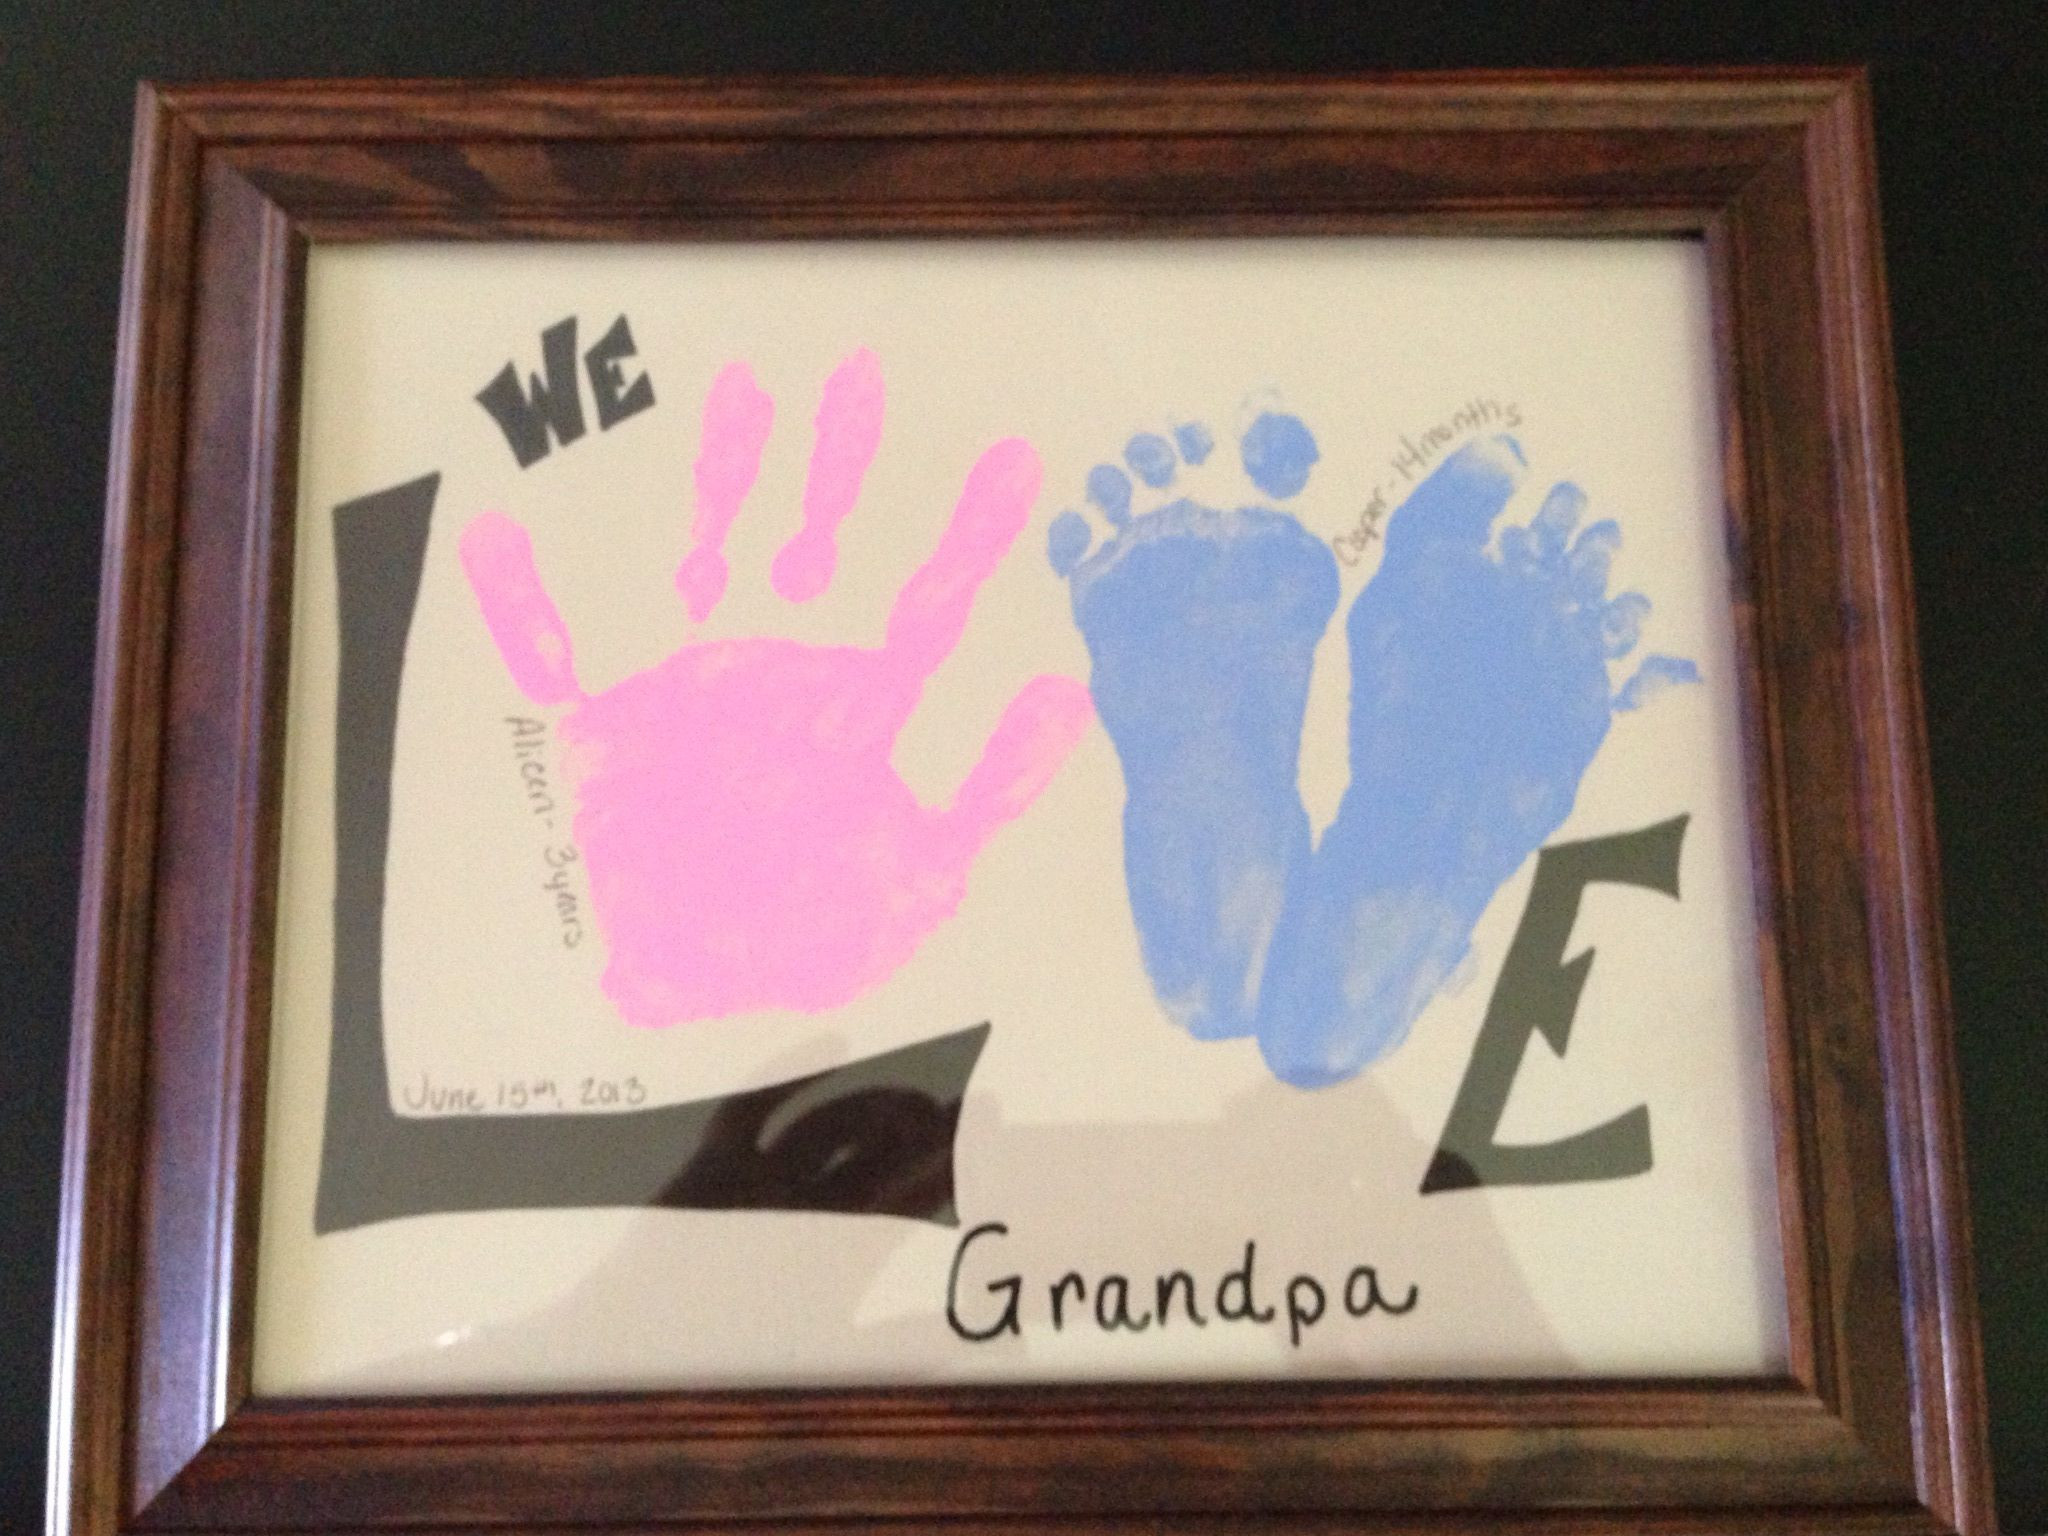 Grandfather Birthday Gift Ideas
 Father s Day Homemade Gifts for Grandpa ImageFiltr